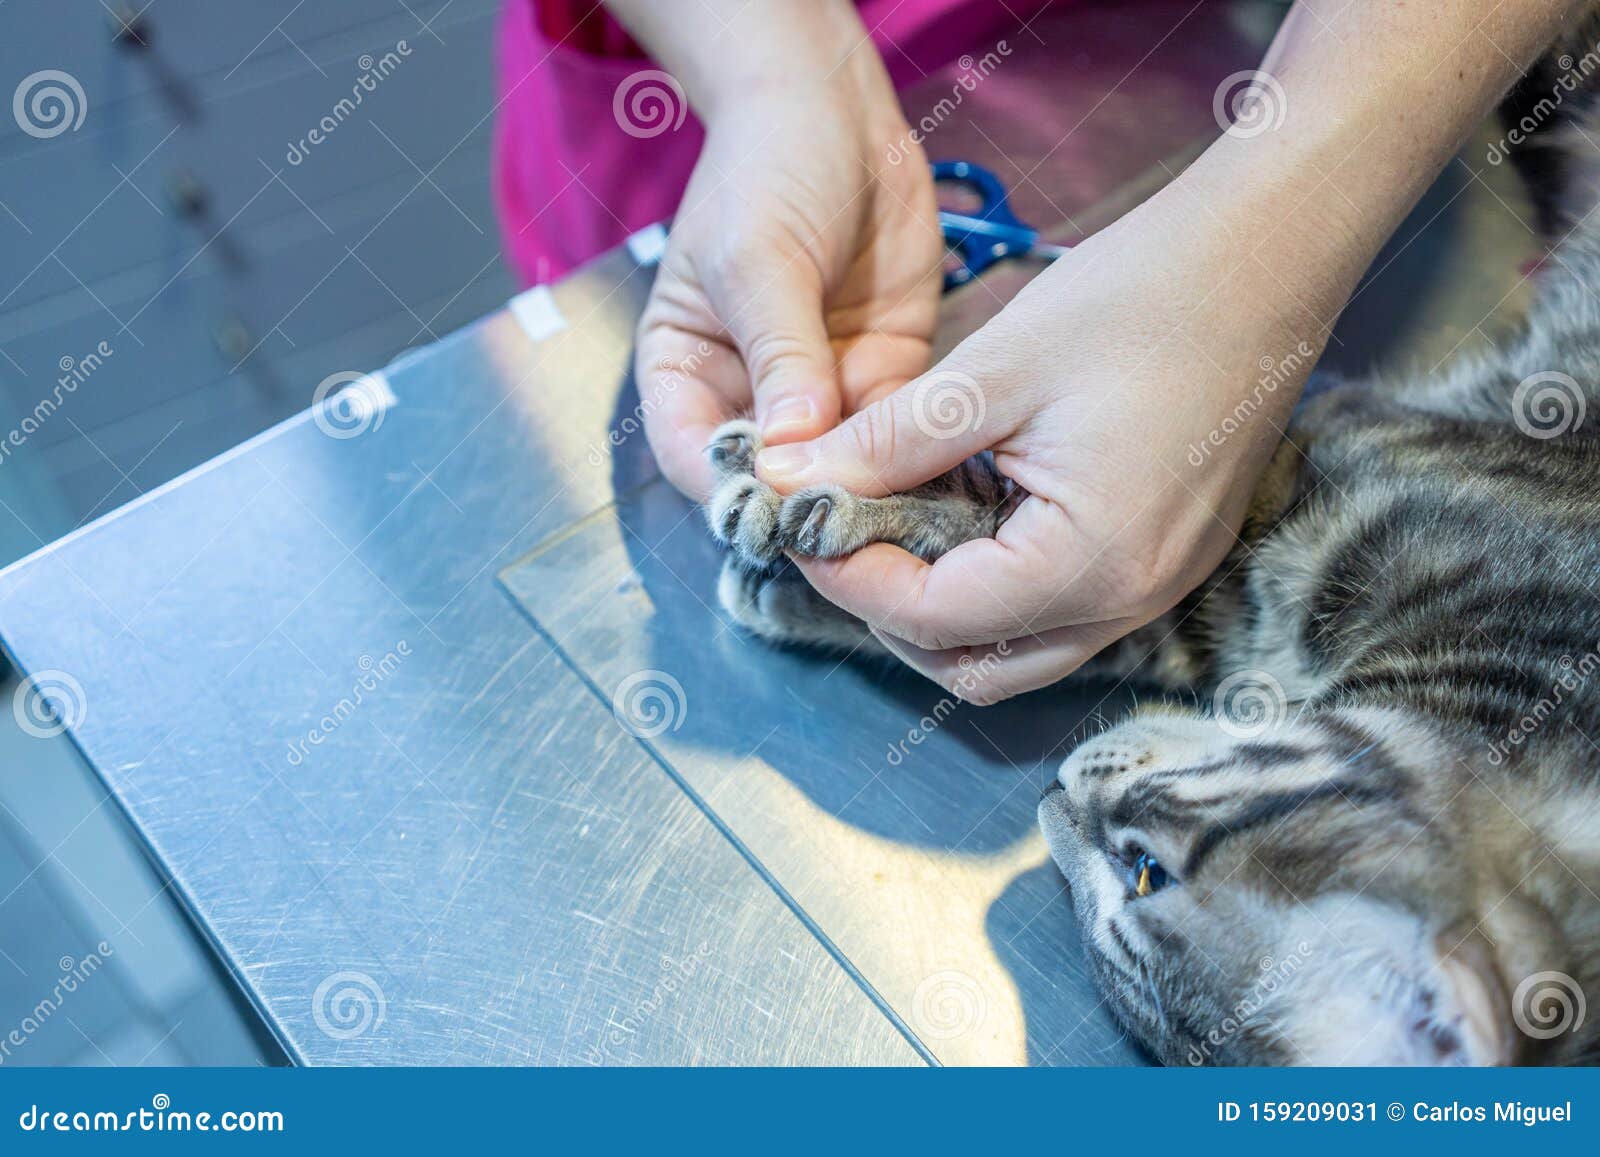 Vet Nurse Examining The Claws Of A Cat Stock Image Image Of Meow Examining 159209031